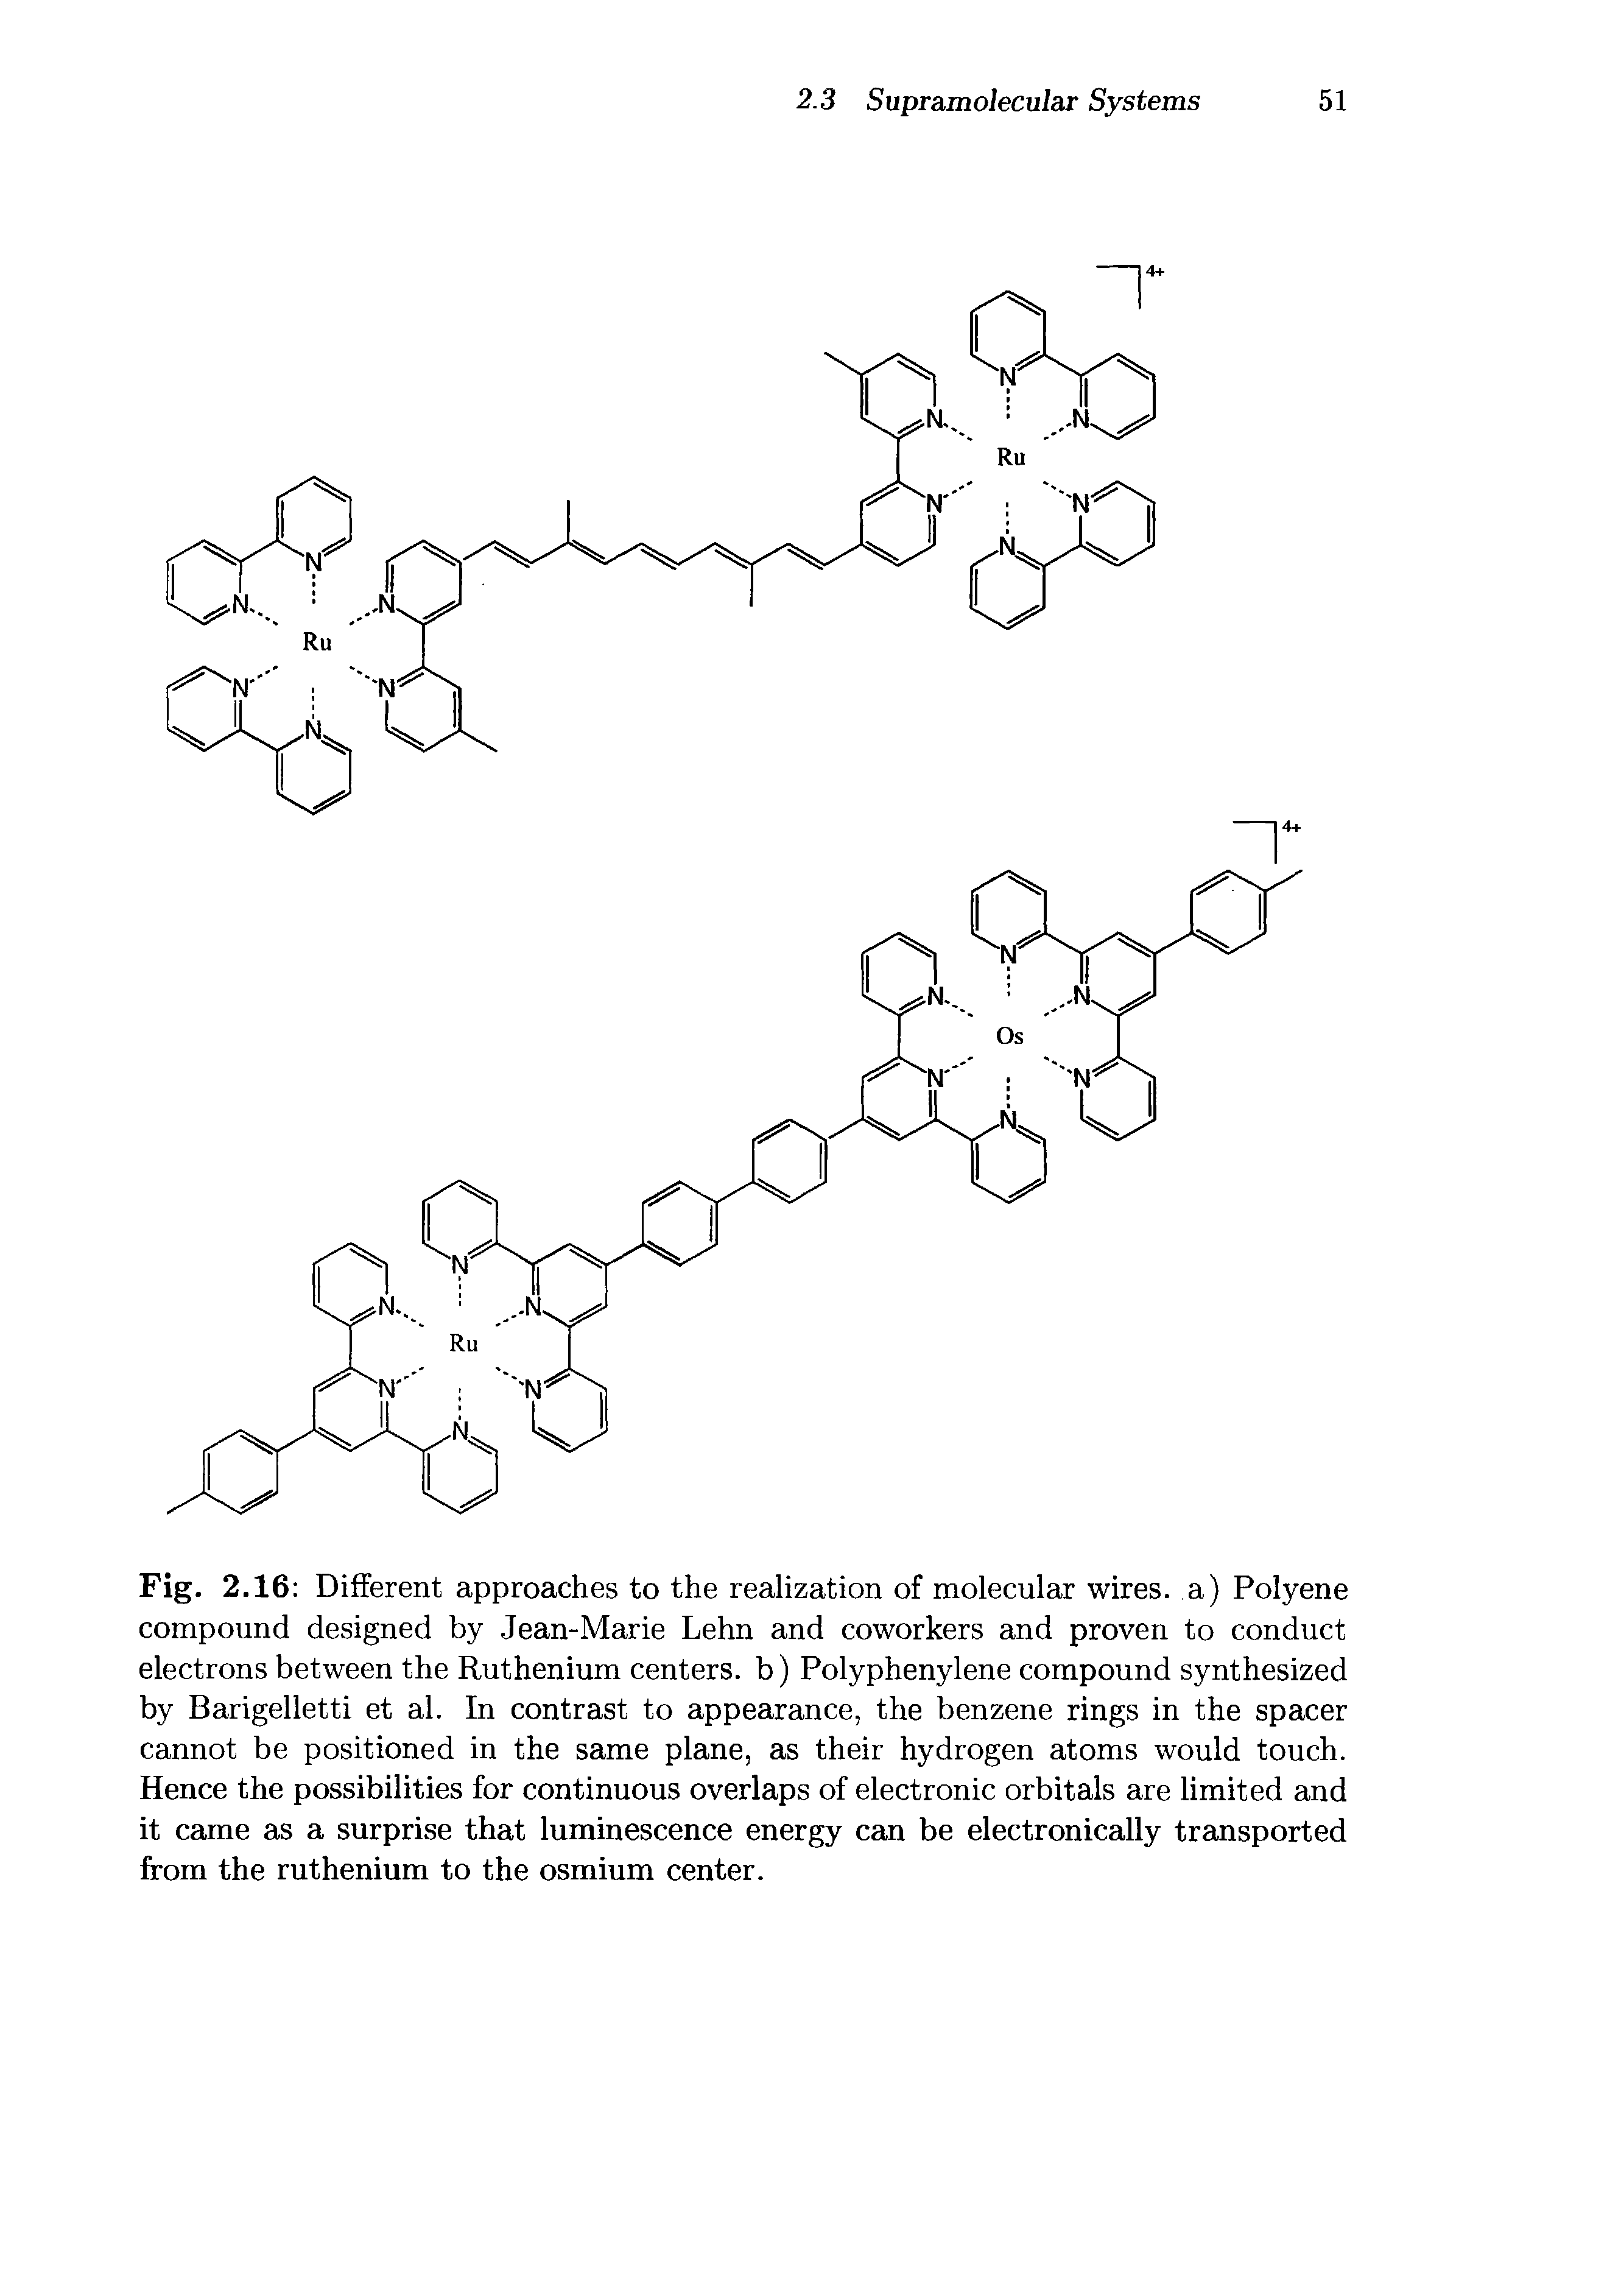 Fig. 2.16 Different approaches to the realization of molecular wires, a) Polyene compound designed by Jean-Marie Lehn and coworkers and proven to conduct electrons between the Ruthenium centers, b) Polyphenylene compound synthesized by Barigelletti et al. In contrast to appearance, the benzene rings in the spacer cannot be positioned in the same plane, as their hydrogen atoms would touch. Hence the possibilities for continuous overlaps of electronic orbitals are limited and it came as a surprise that luminescence energy can be electronically transported from the ruthenium to the osmium center.